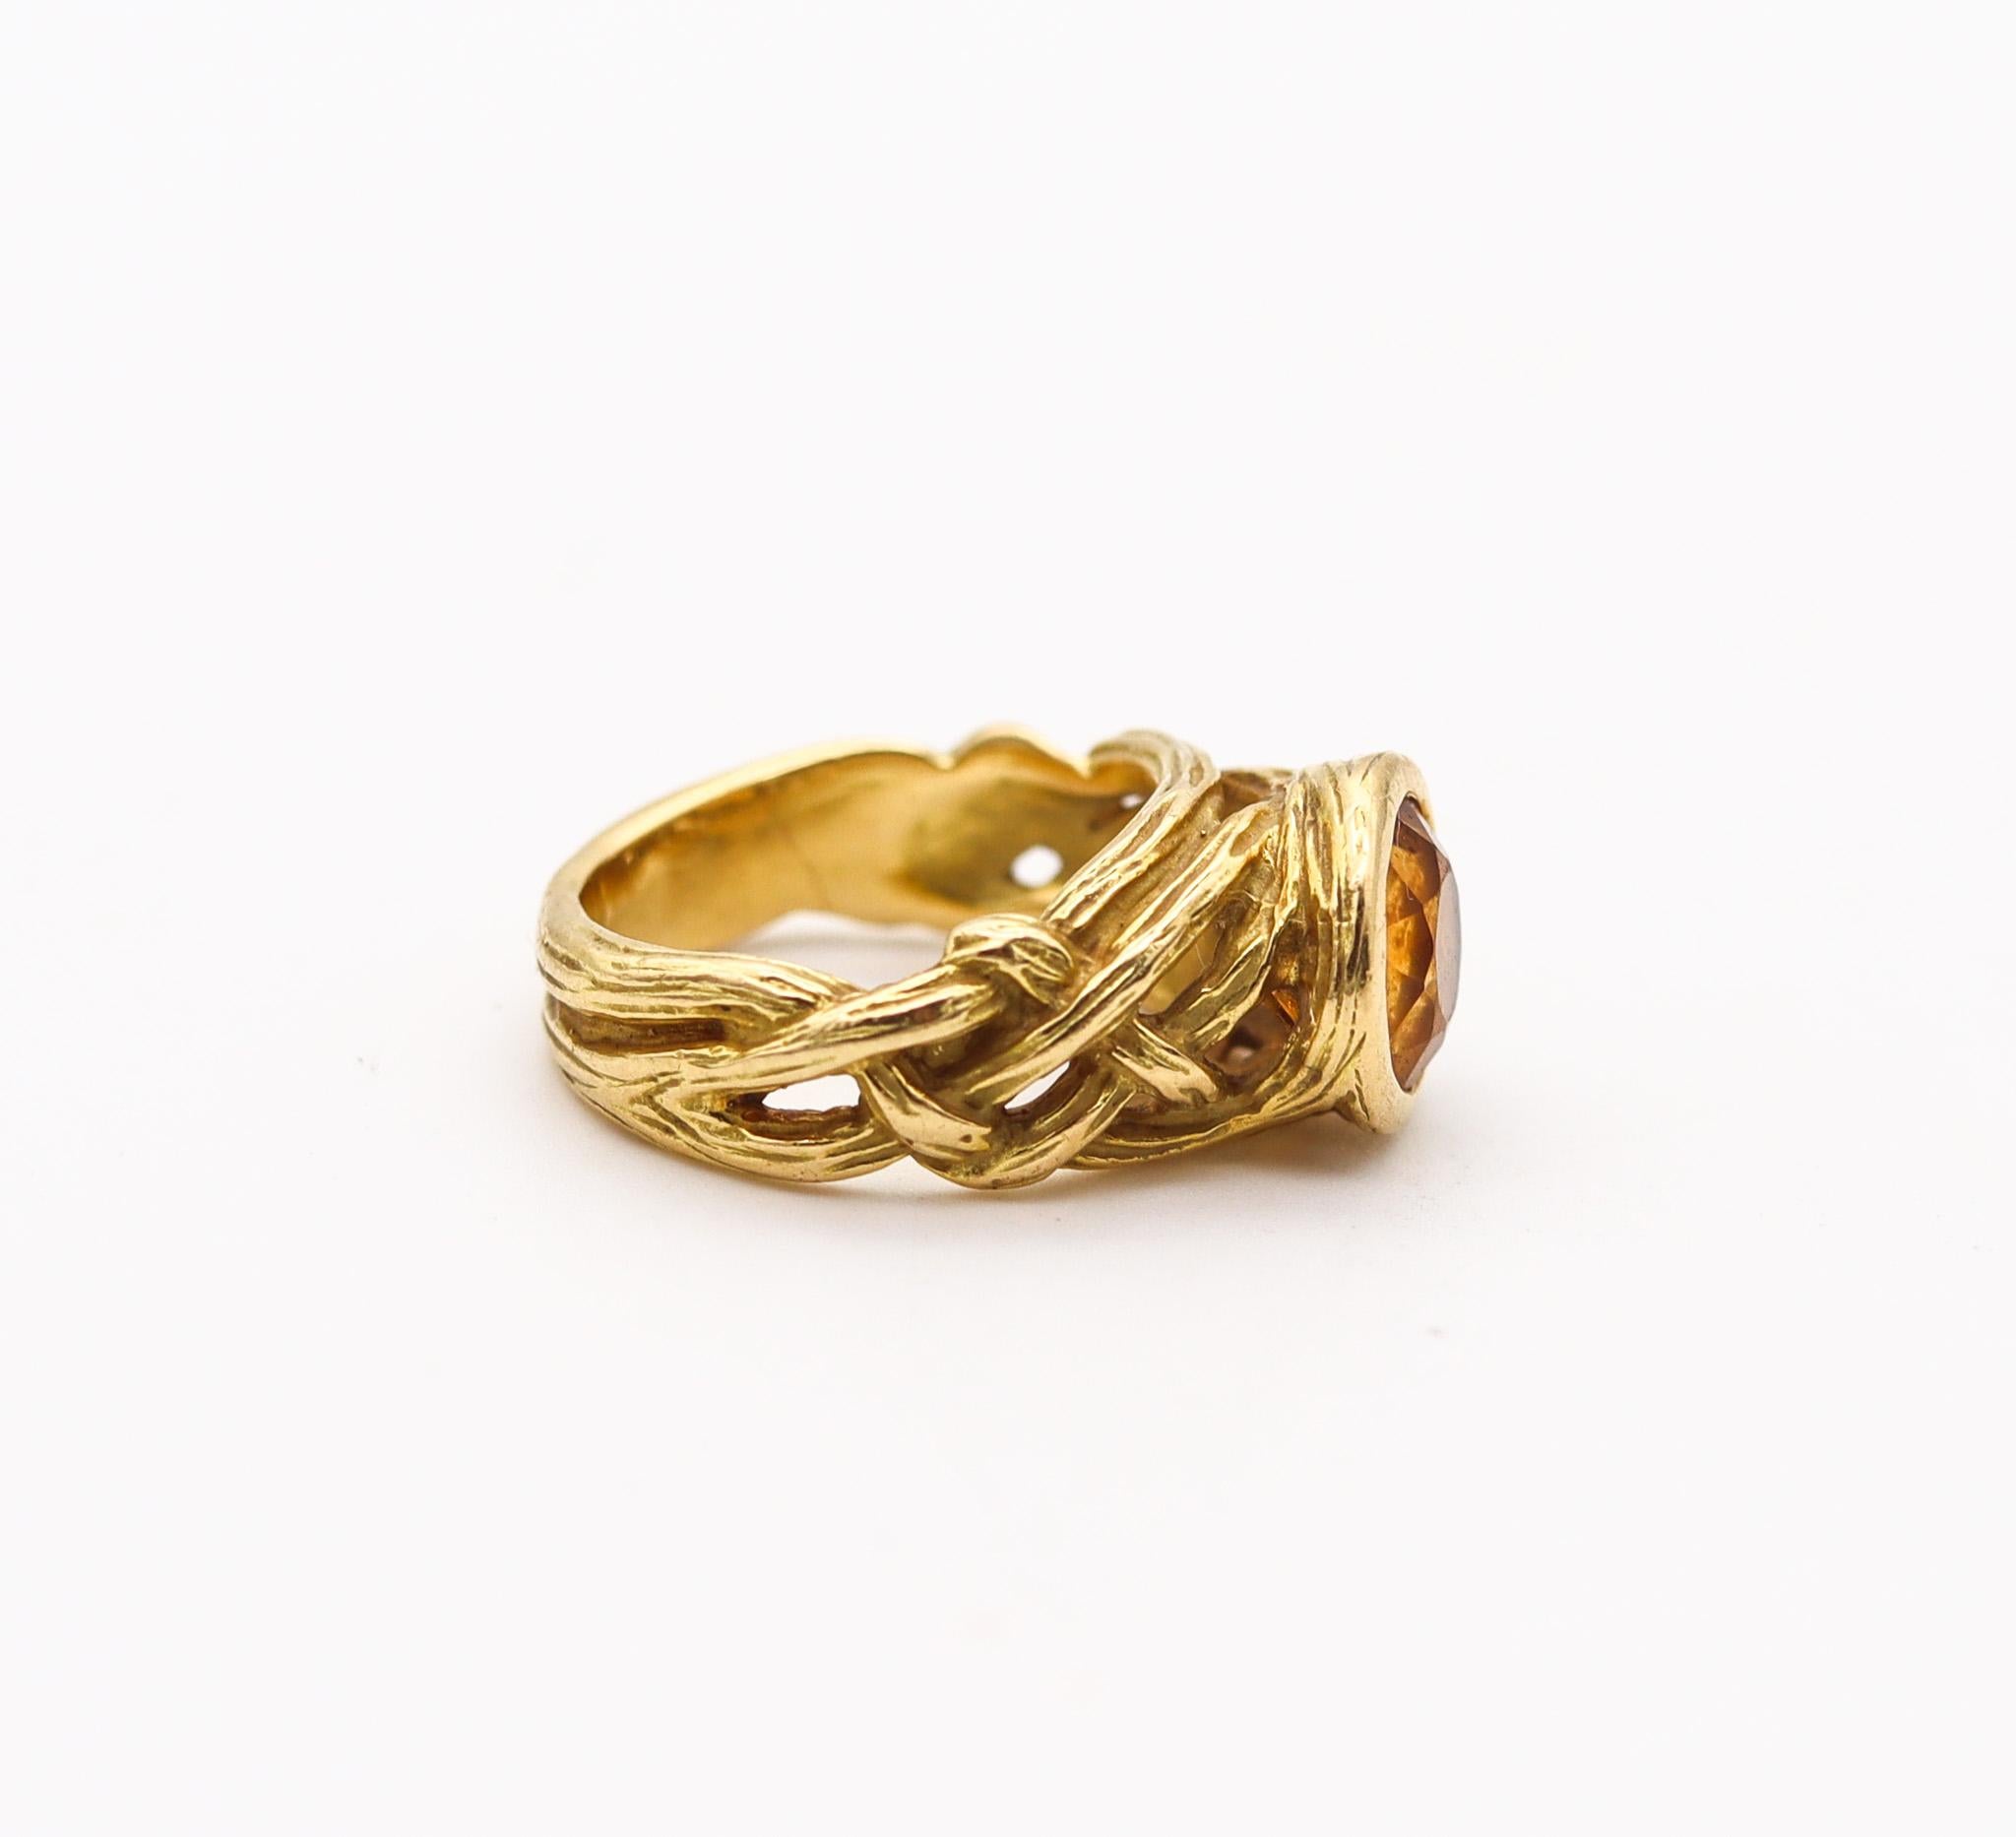 An organic cocktail ring designed by Angela Cummings.

Very nice and unusual ring, created at the jewelry atelier of Angela cummings back in the 1991. This sculptural ring has been crafted with organic motifs in solid yellow gold of 18 karats with